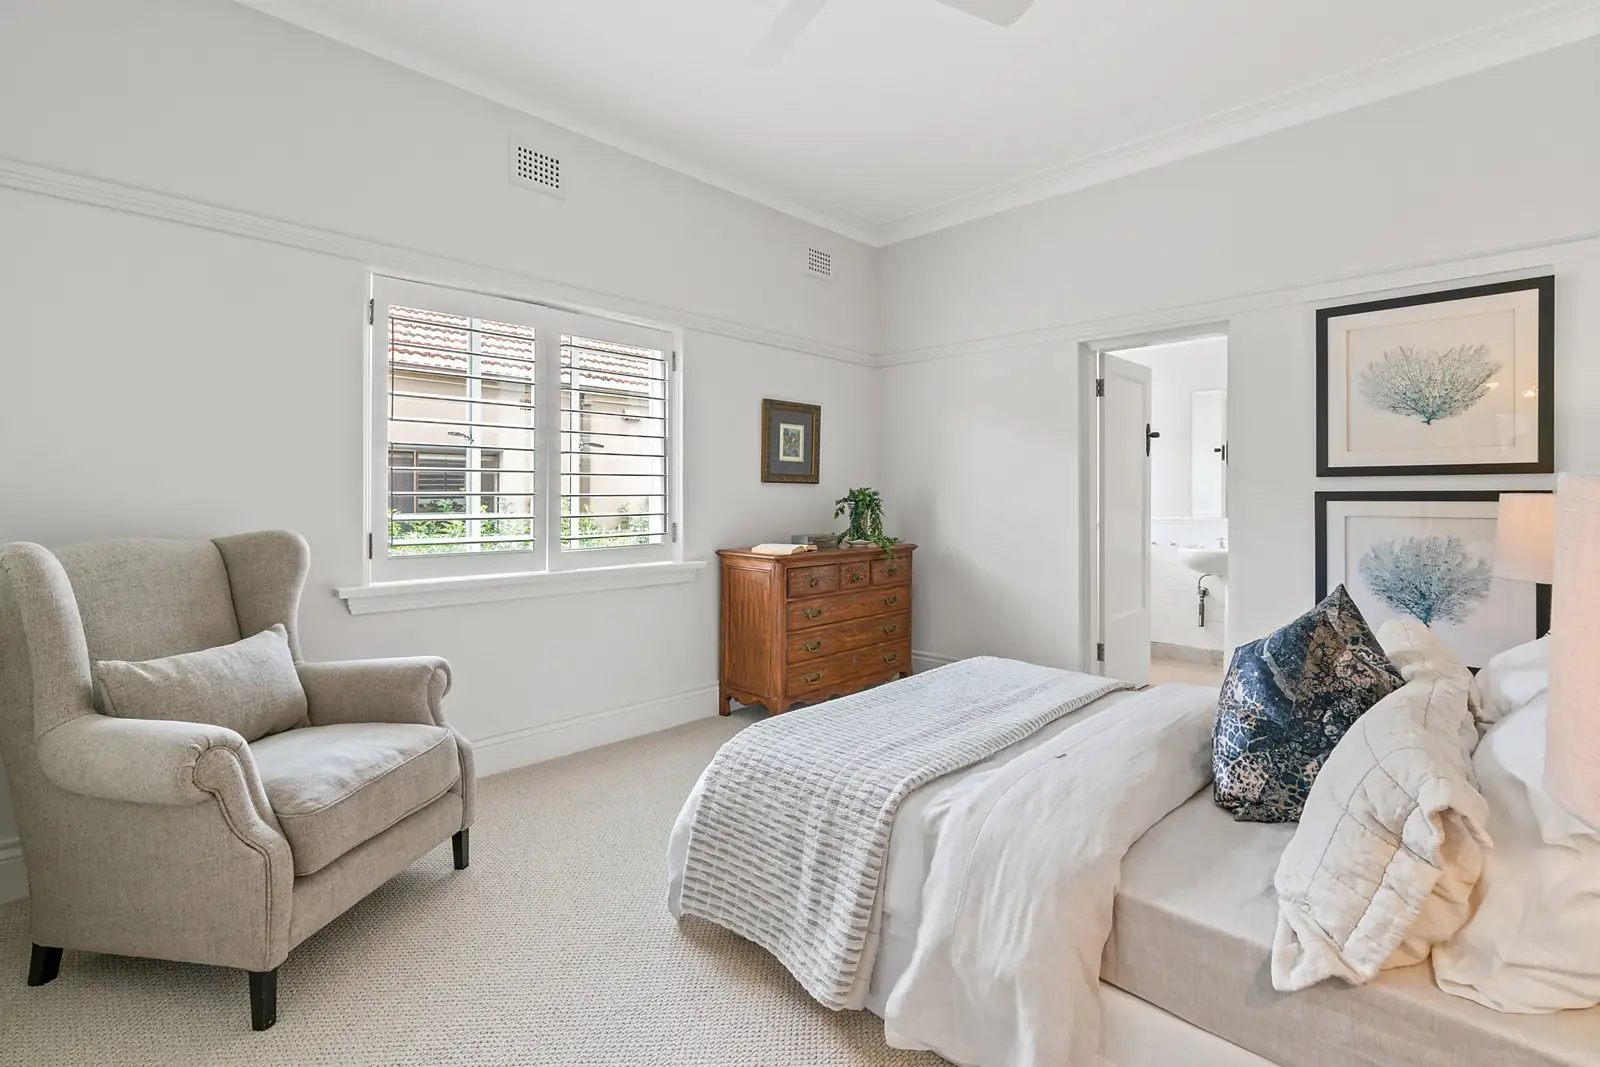 Photo #2: 3/21 William Street, Double Bay - Sold by Sydney Sotheby's International Realty